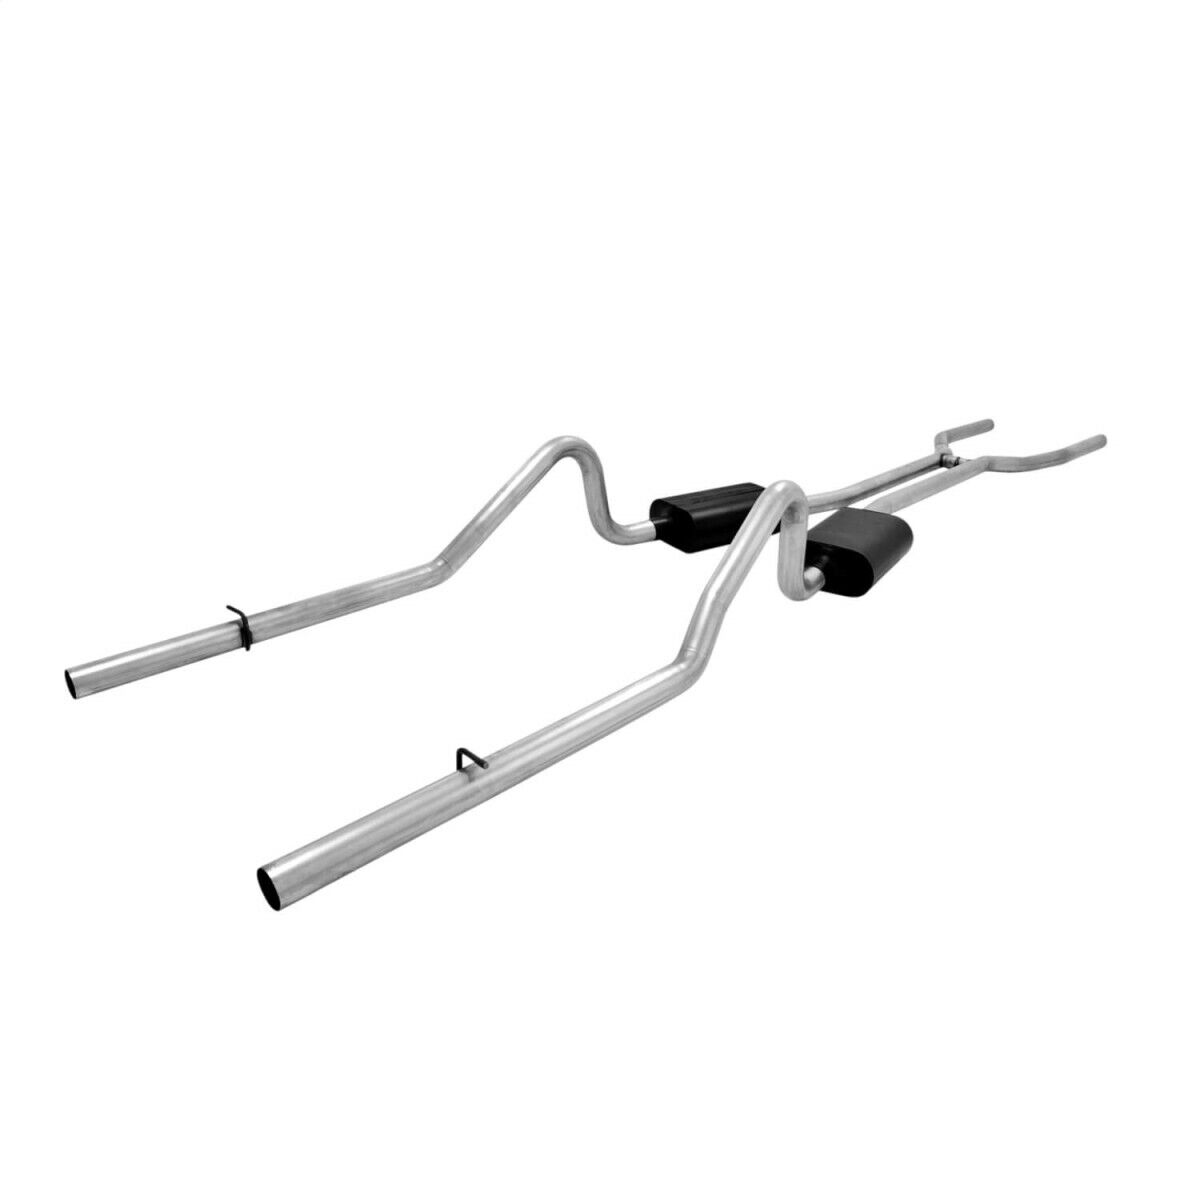 817390 Flowmaster Exhaust System for Dodge Charger Plymouth Satellite Coronet